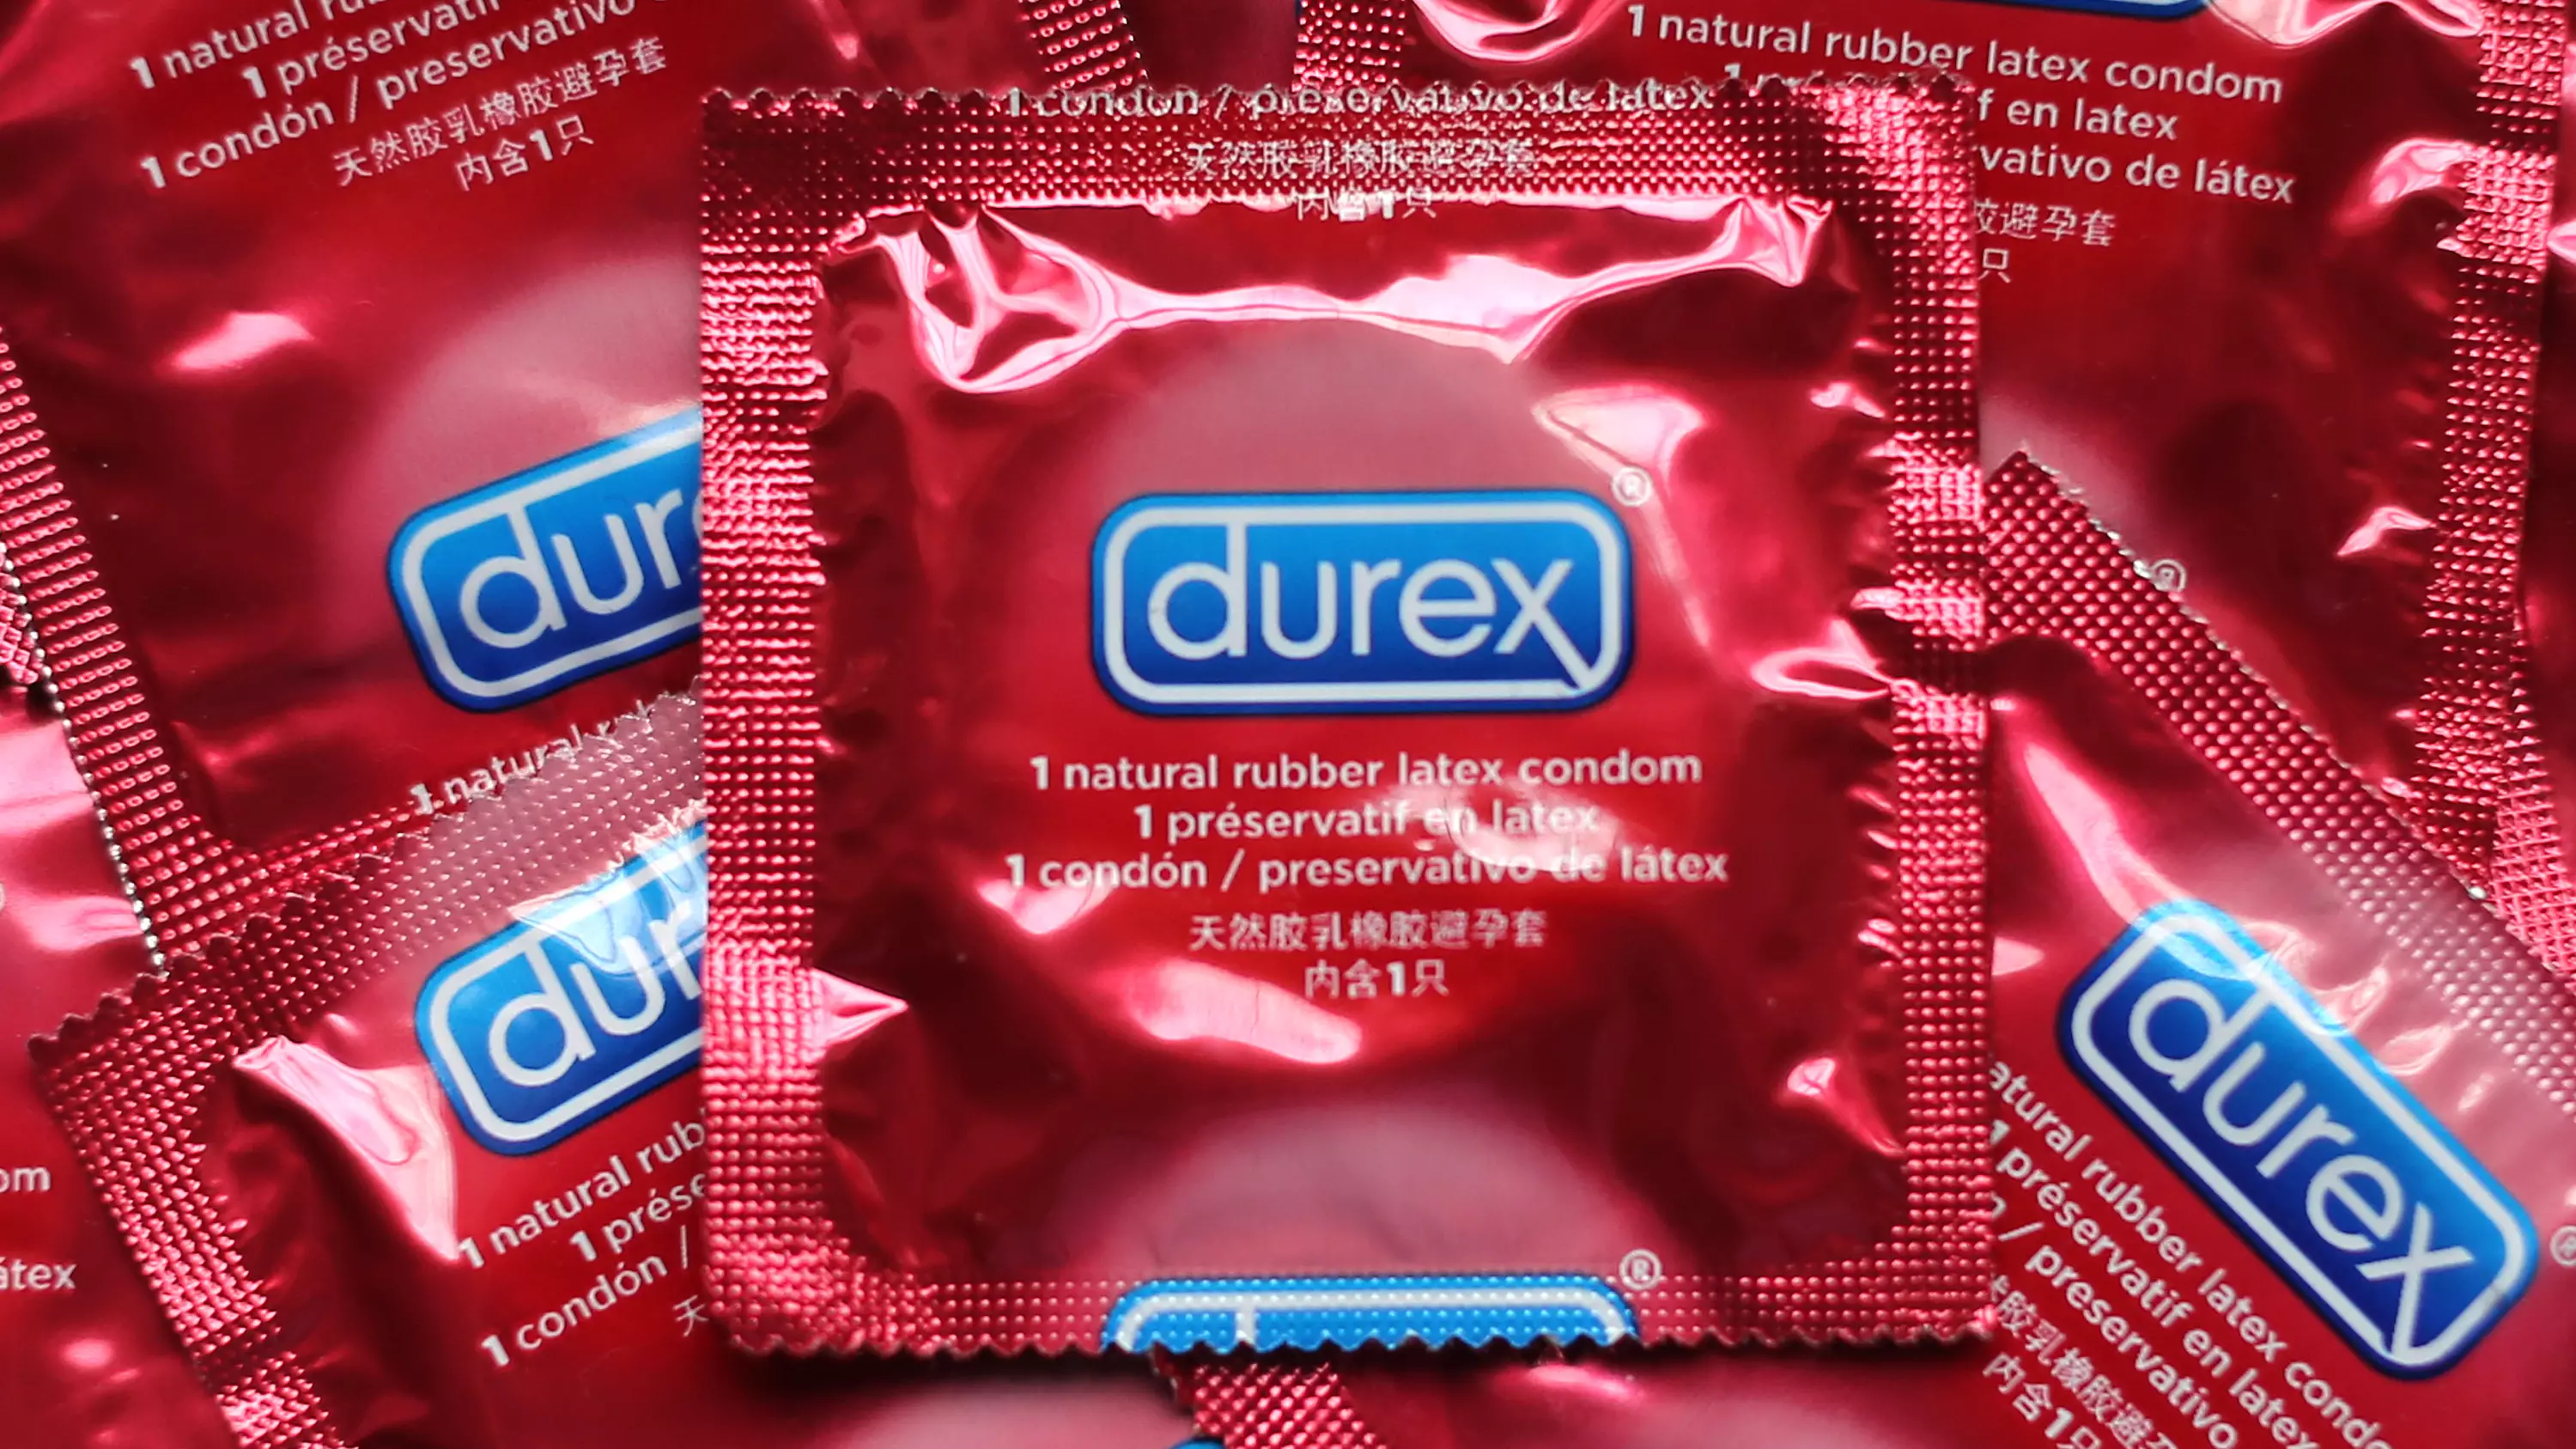 Durex Reports Large Increase In Sales After The End Of Lockdown